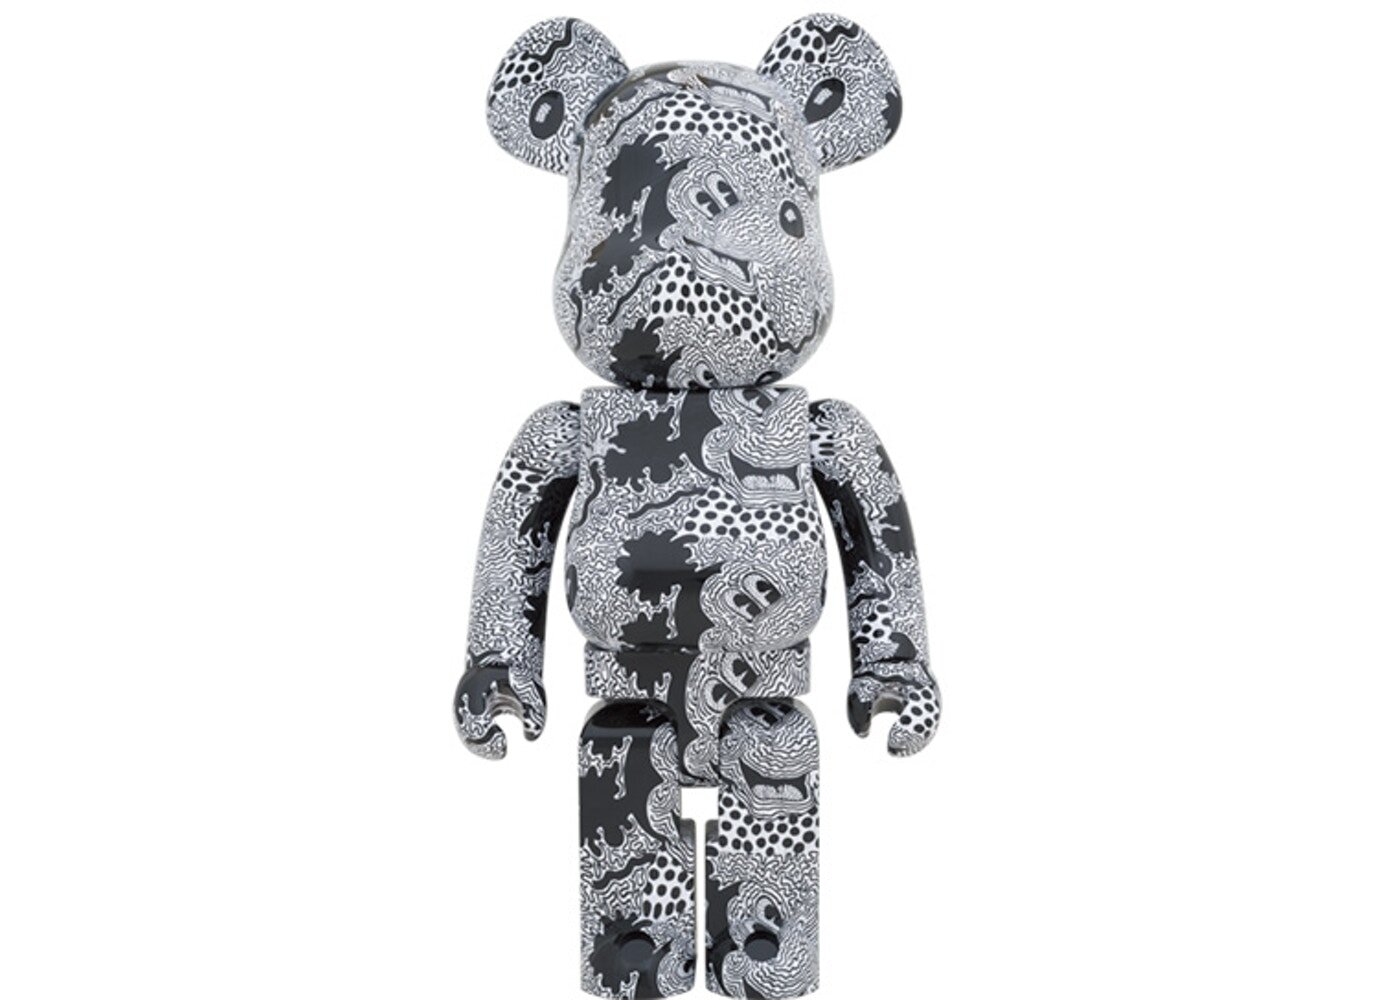 Details about   Medicom Bearbrick 2020 Keith Haring Disney Mickey Mouse 400% 100% be@rbrick 2p 